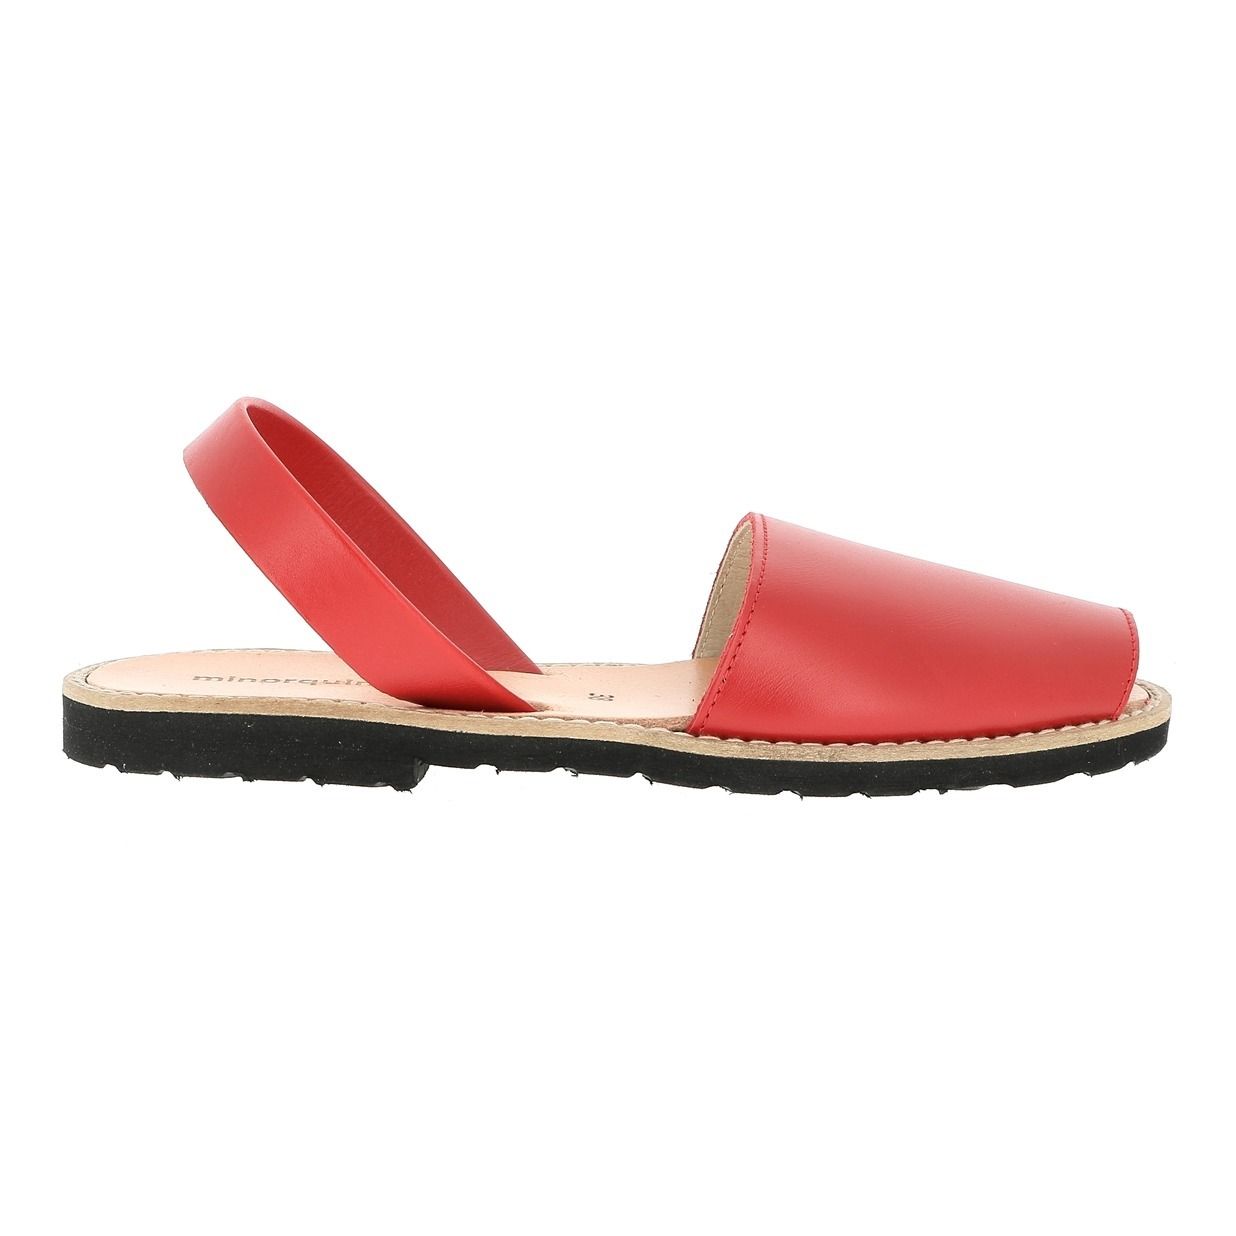 Minorquines - Sandales Cuir Avarca - Collection Adulte - - Femme - Rouge